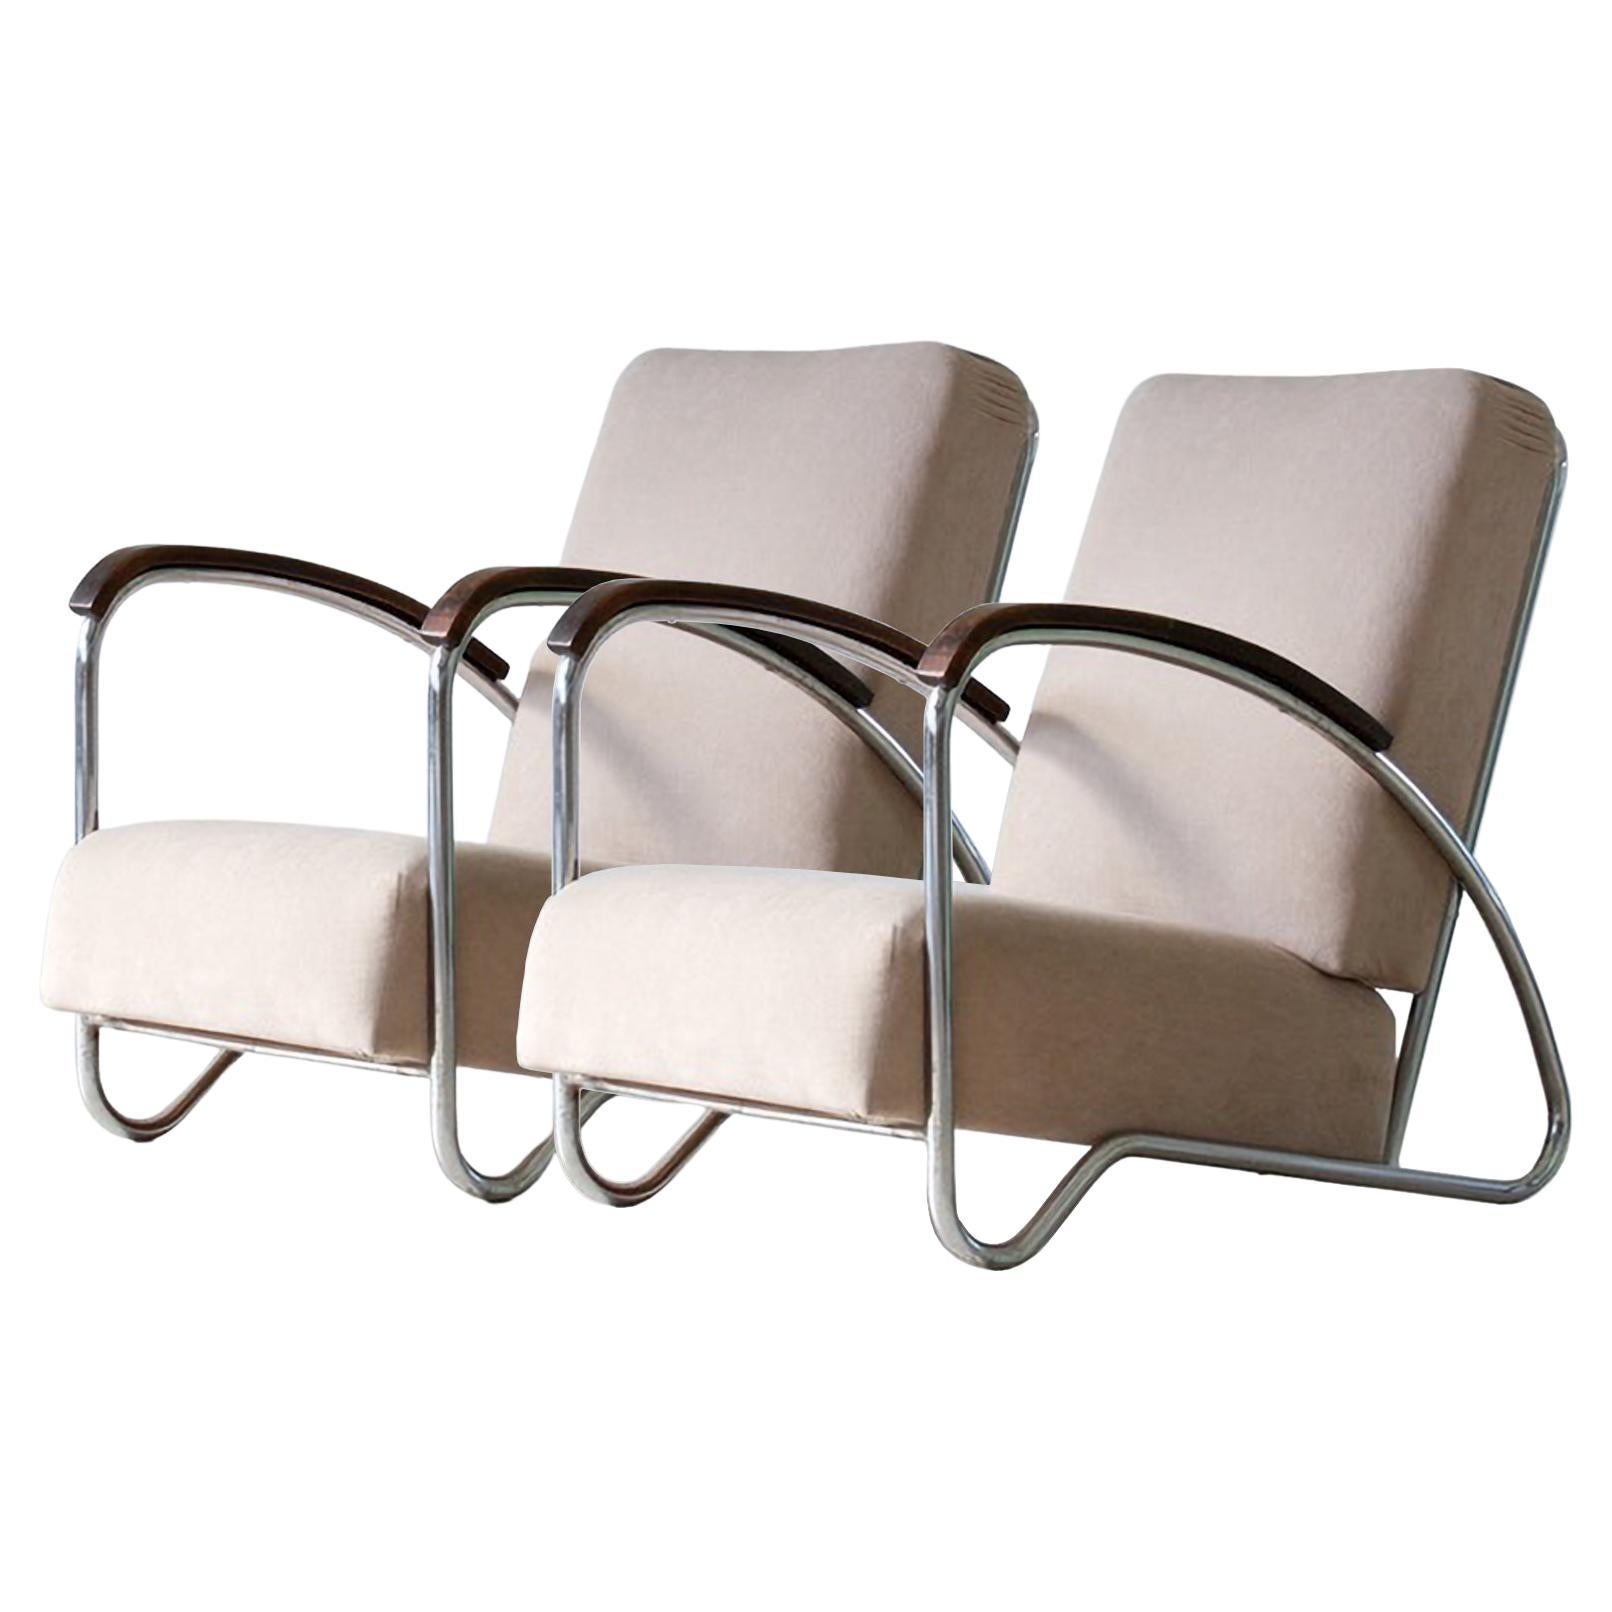 Modernist Tubular Steel Armchairs, Can Be Covered In Fabric Or Leather, c 1930 For Sale